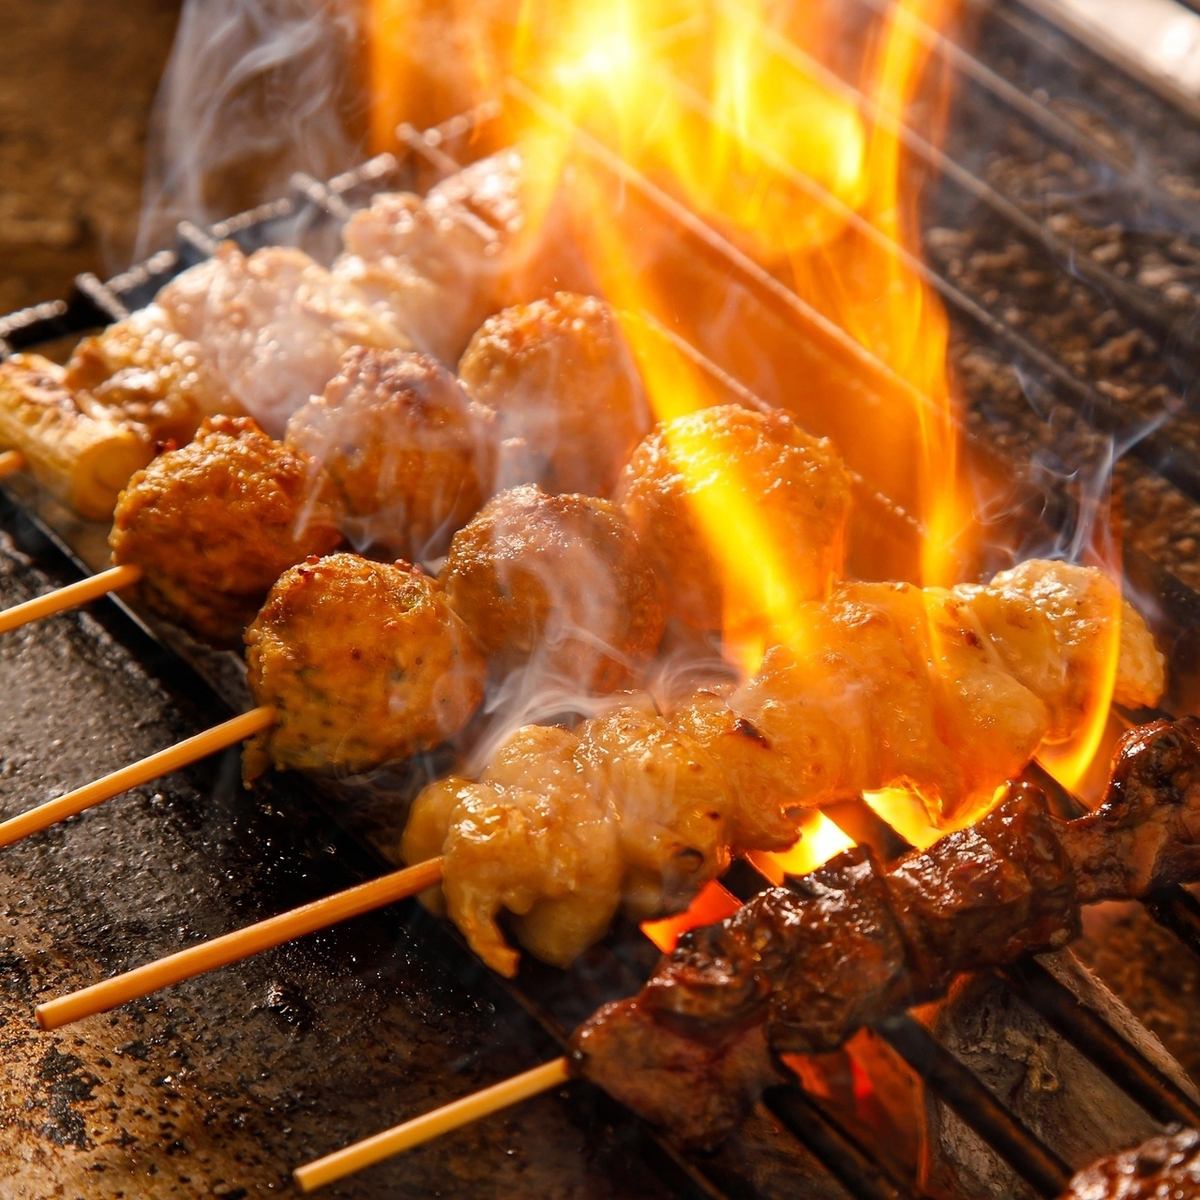 All-you-can-eat charcoal grilled yakitori at a great price!